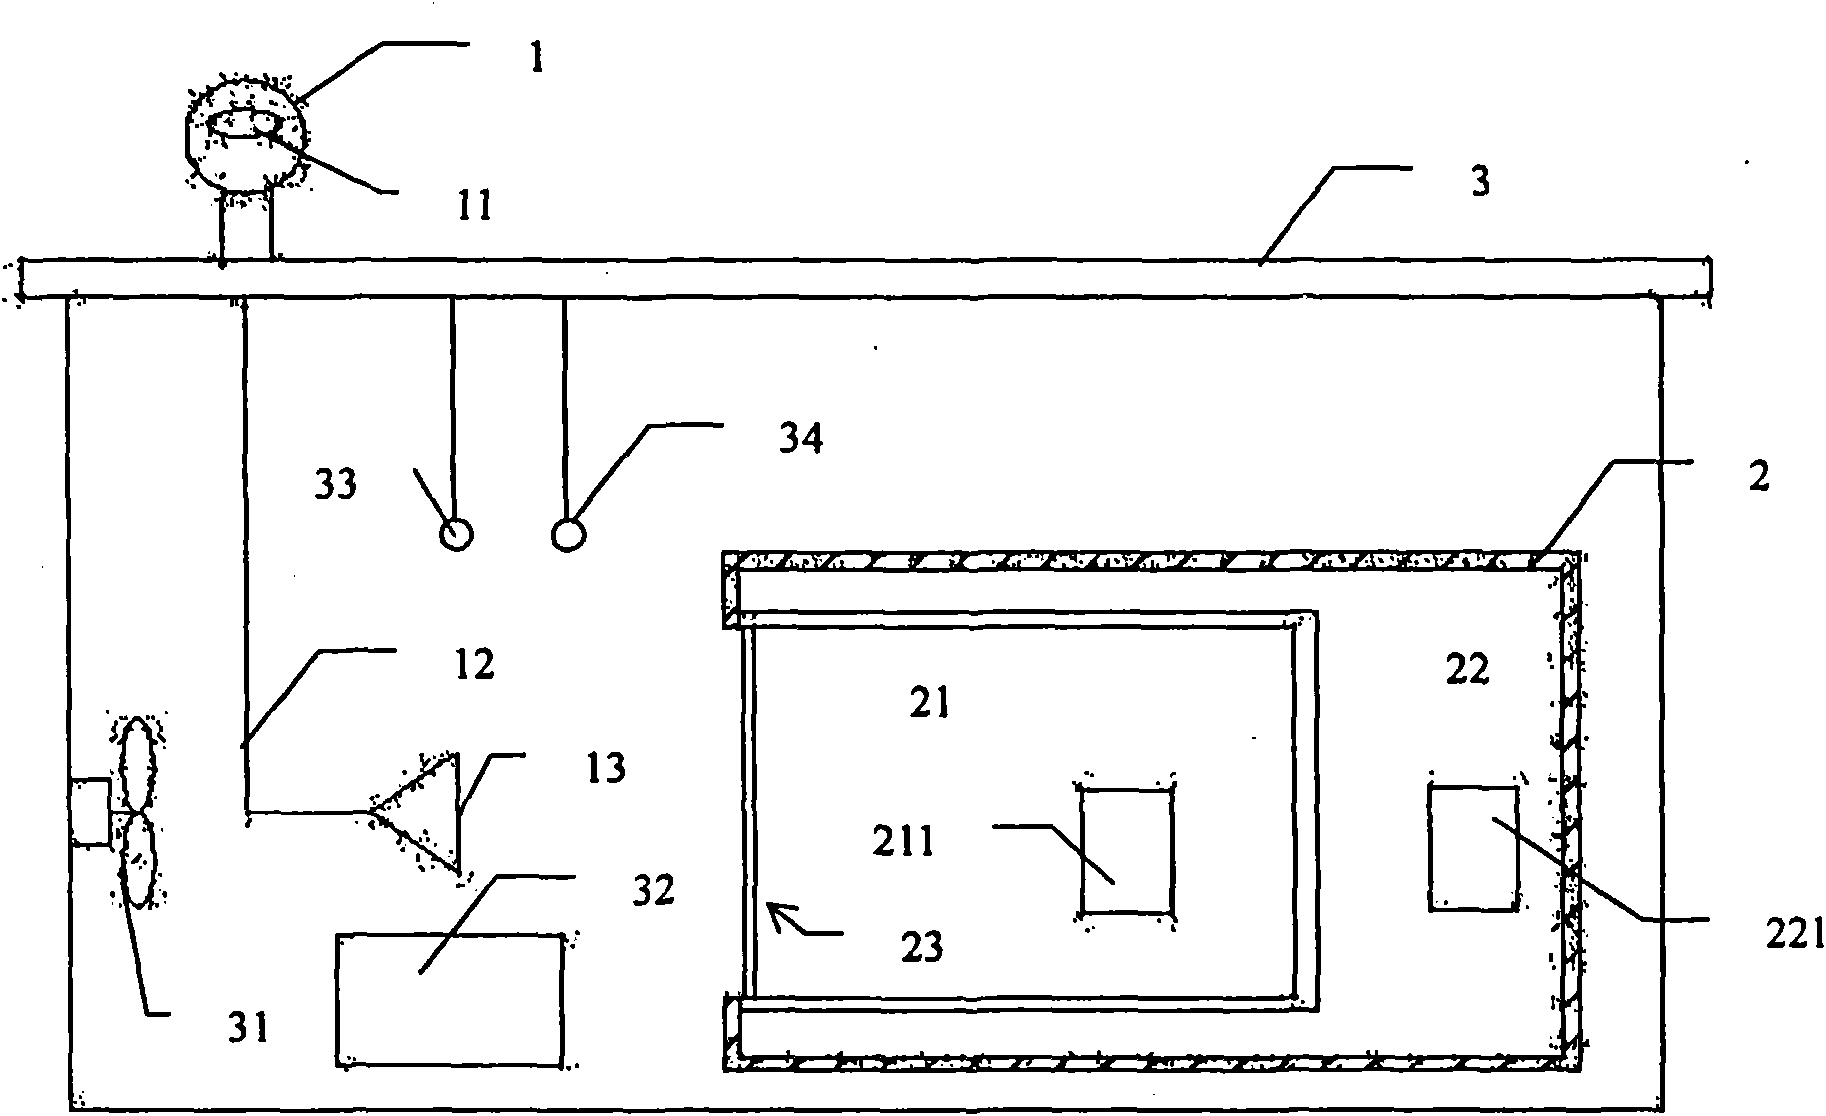 Equipment and method for detecting energy-saving effect of building sun-shading device using imported sunlight